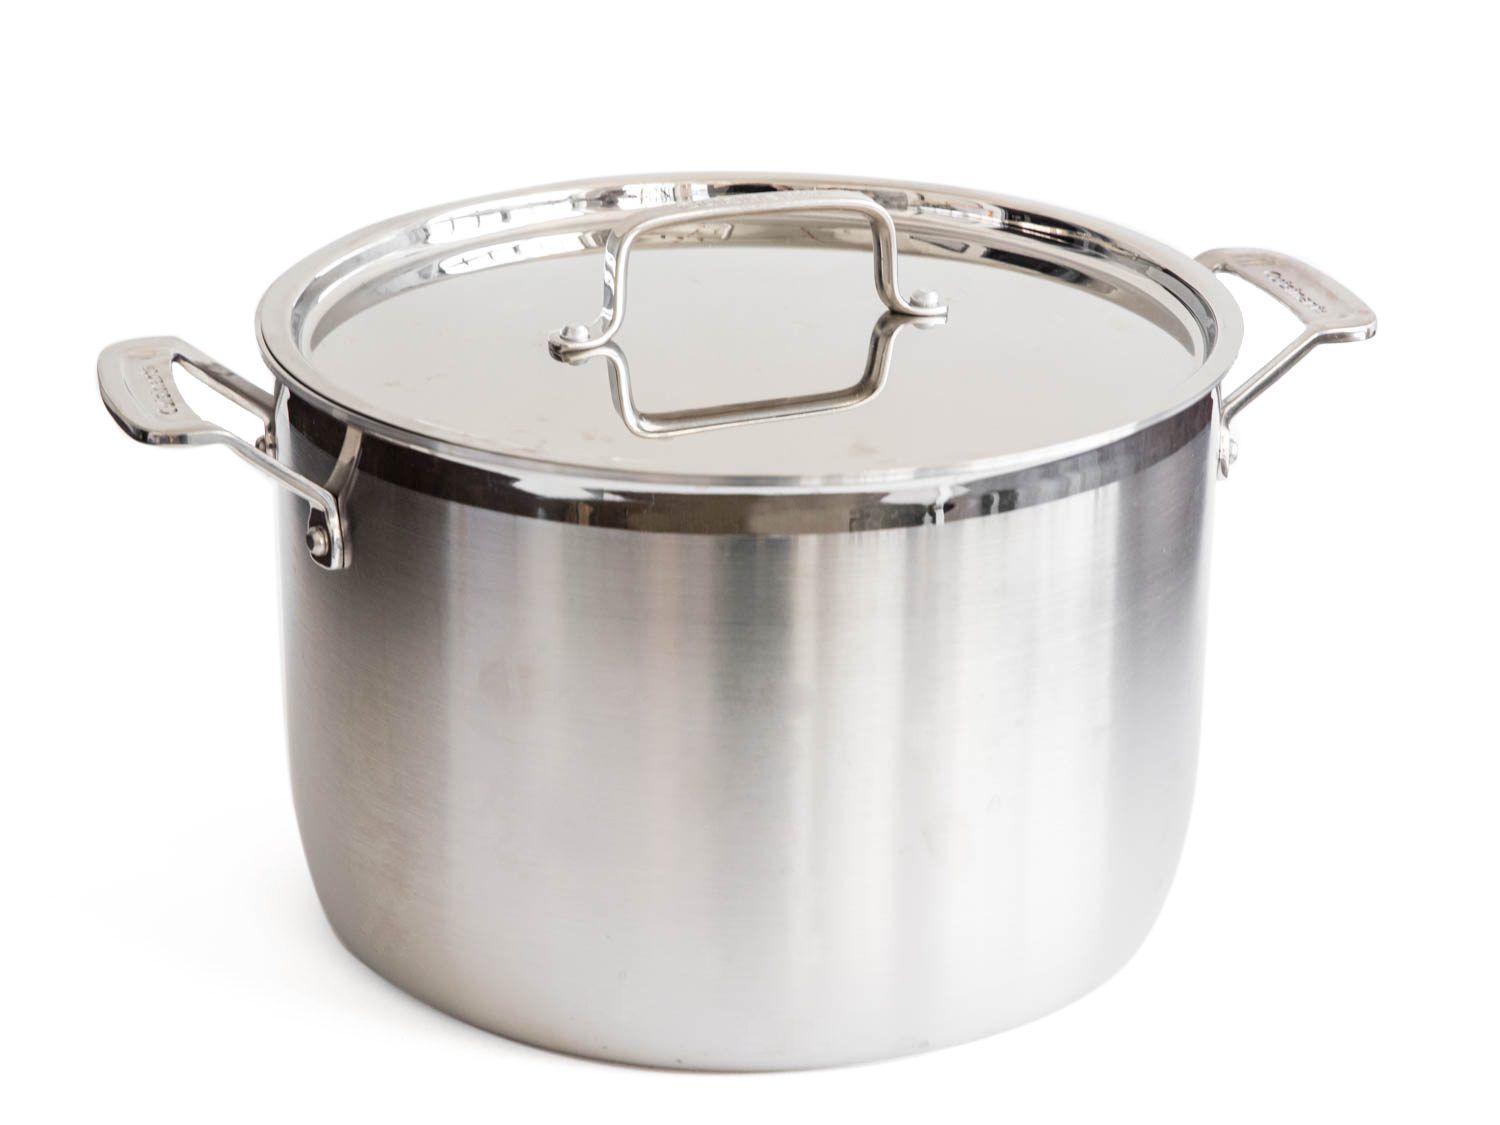 Stockpot Review: The Perfect Addition to Your Kitchen